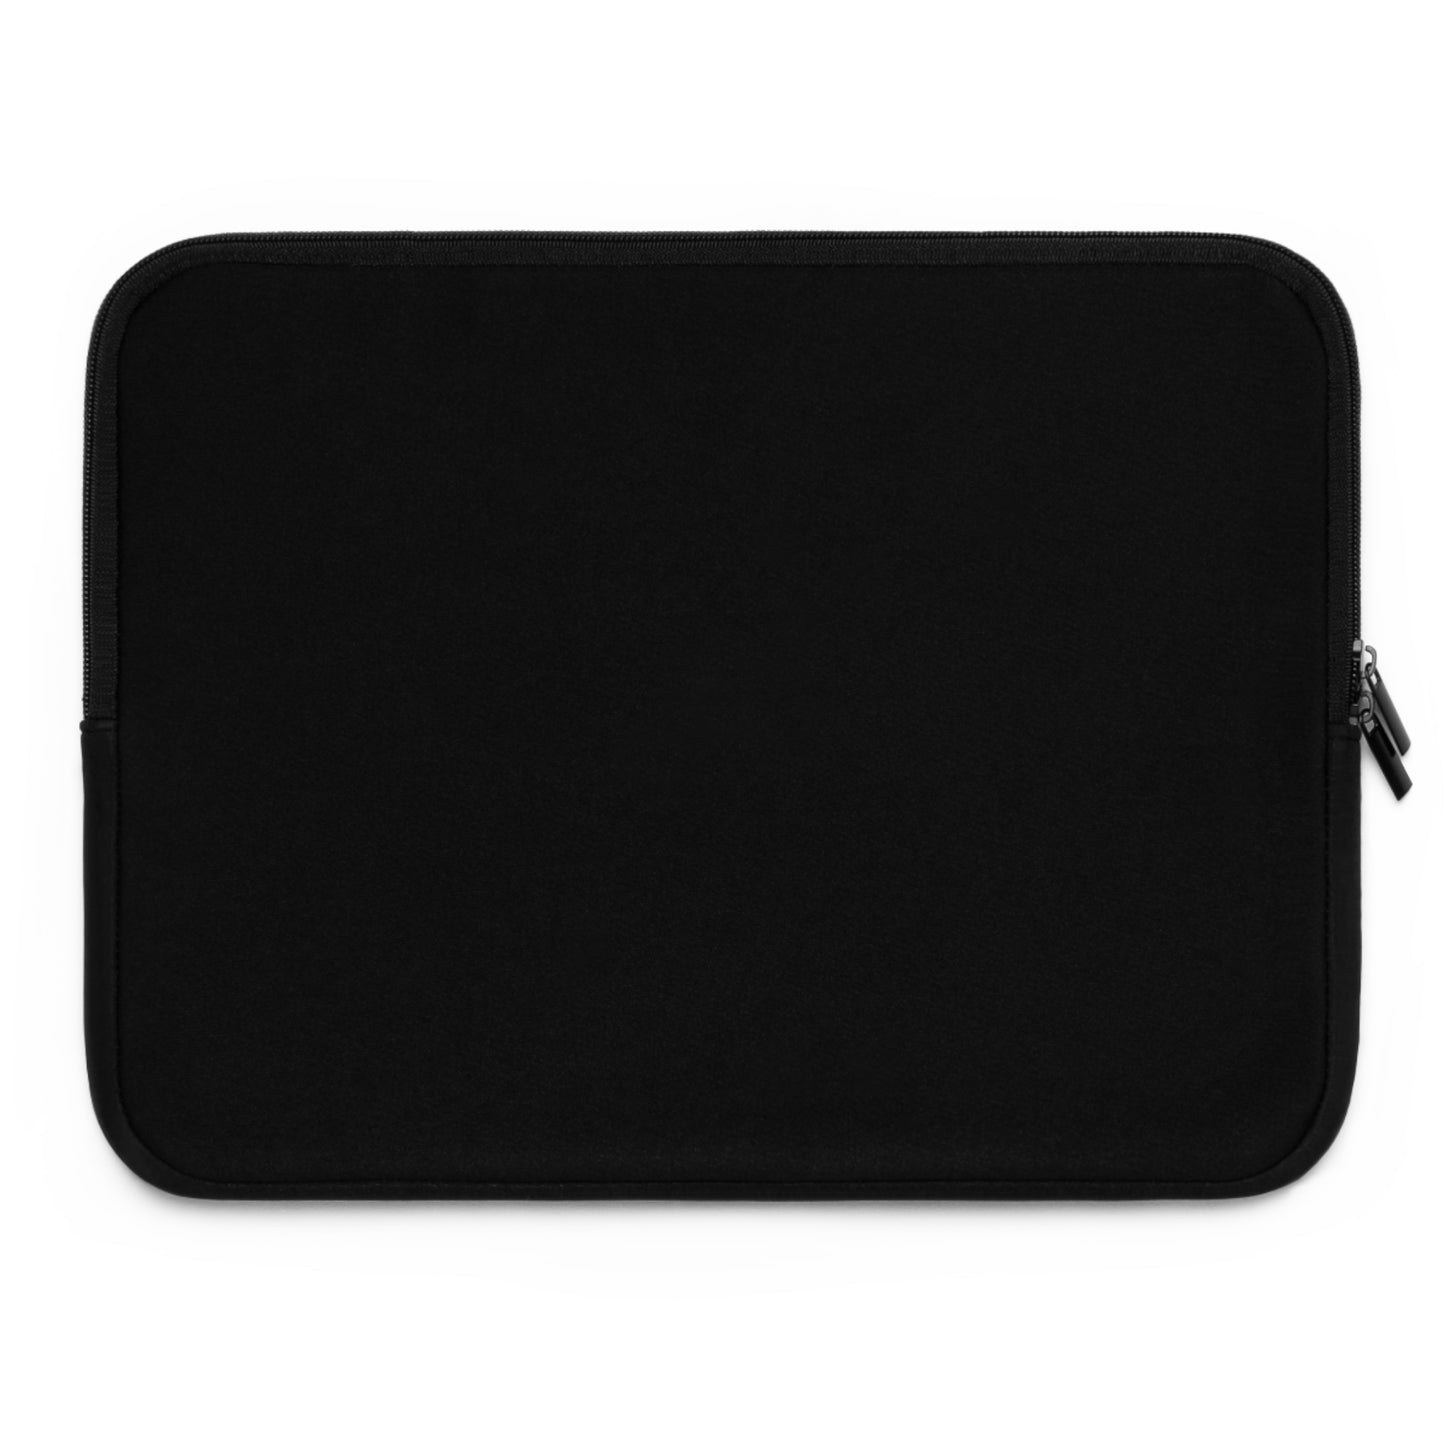 Streets Of The Em­pi­re Laptop Sleeve